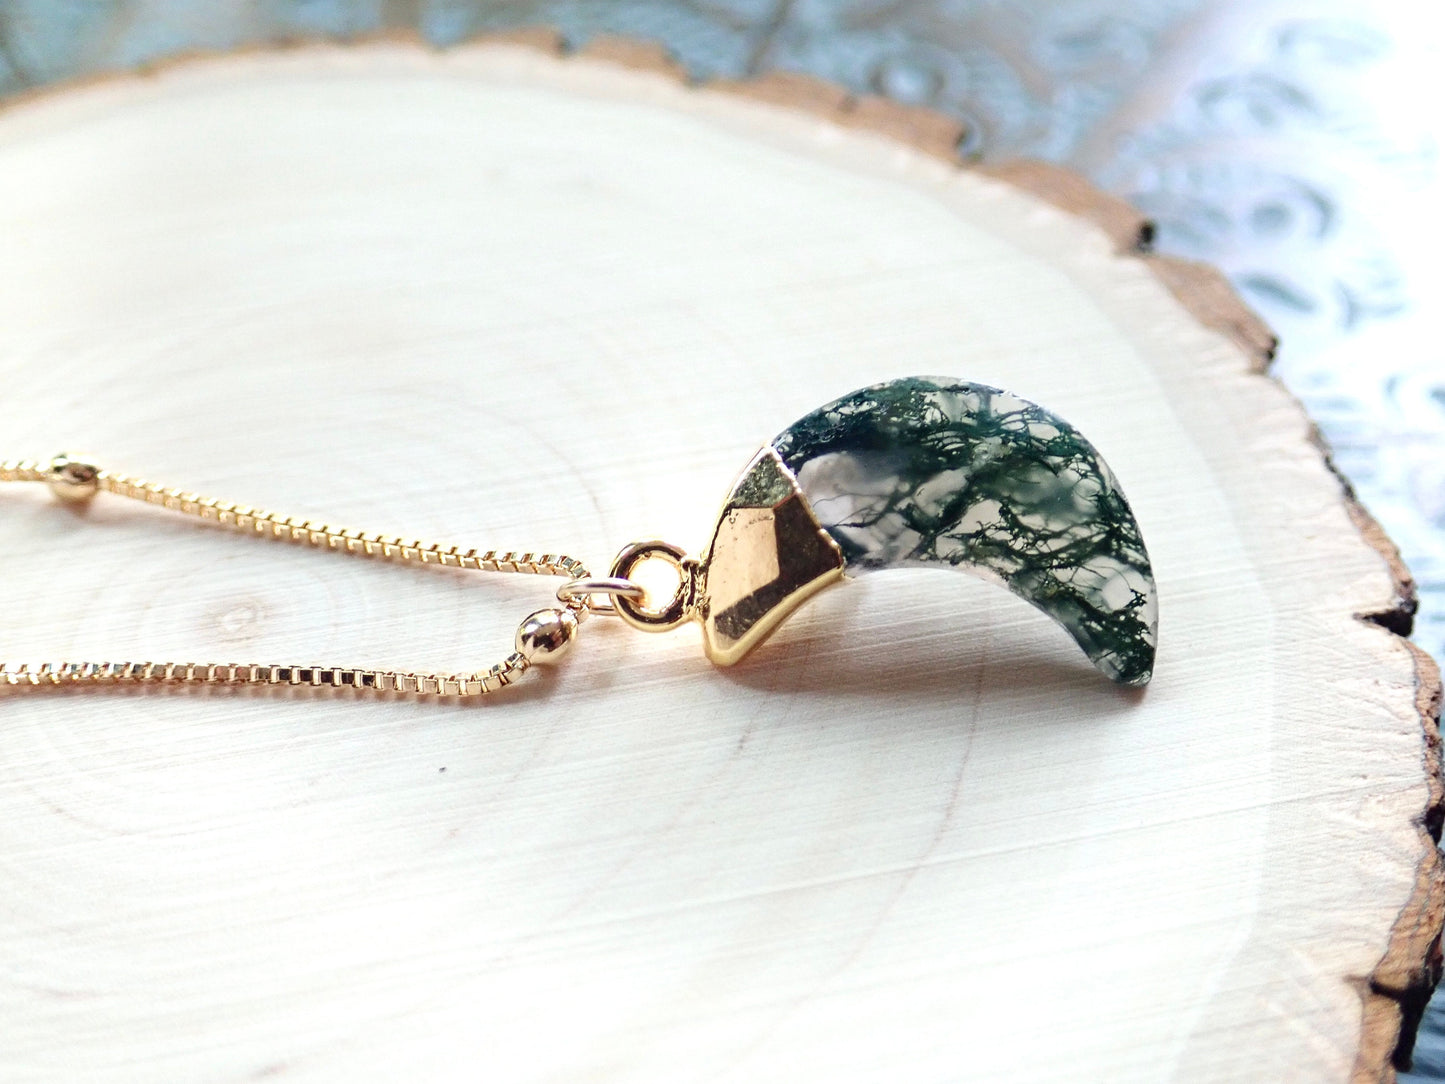 Moss Agate Crescent Moon Necklace